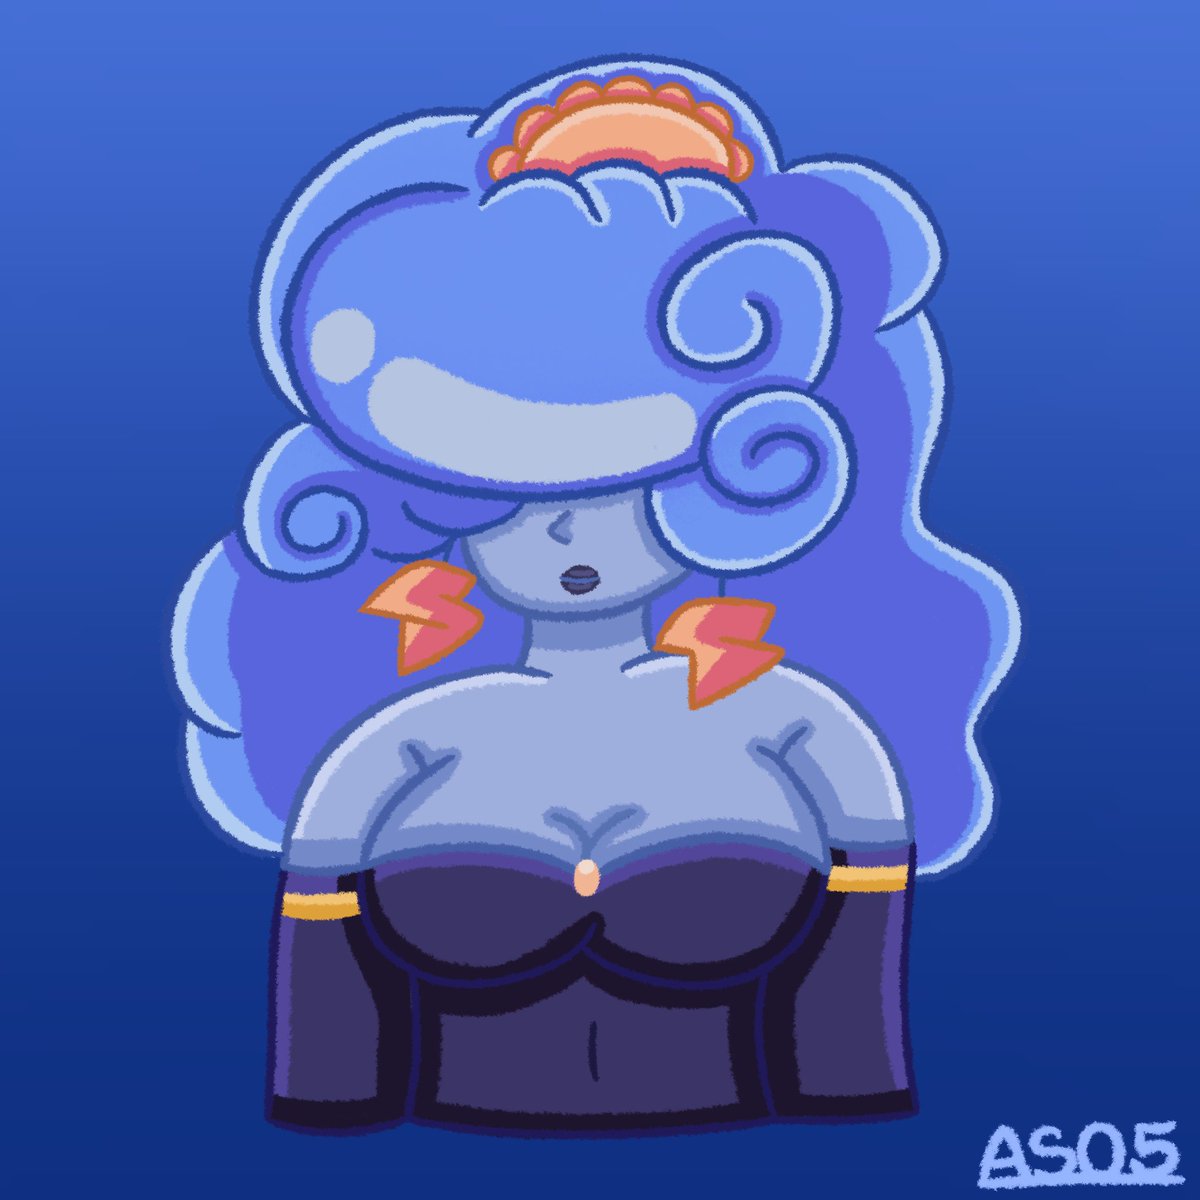 Formal Cloudia. 

Since Cam has reached 9K followers recently, I decided to give this beautiful dress for Cloudia as a gift art for this milestone.

Congrats on 9K followers, @CamsSketchyDra1!

💙/🔄s are welcomed!

#ArtistOnTwitter #AS05 #OCFanart #DigitalArt